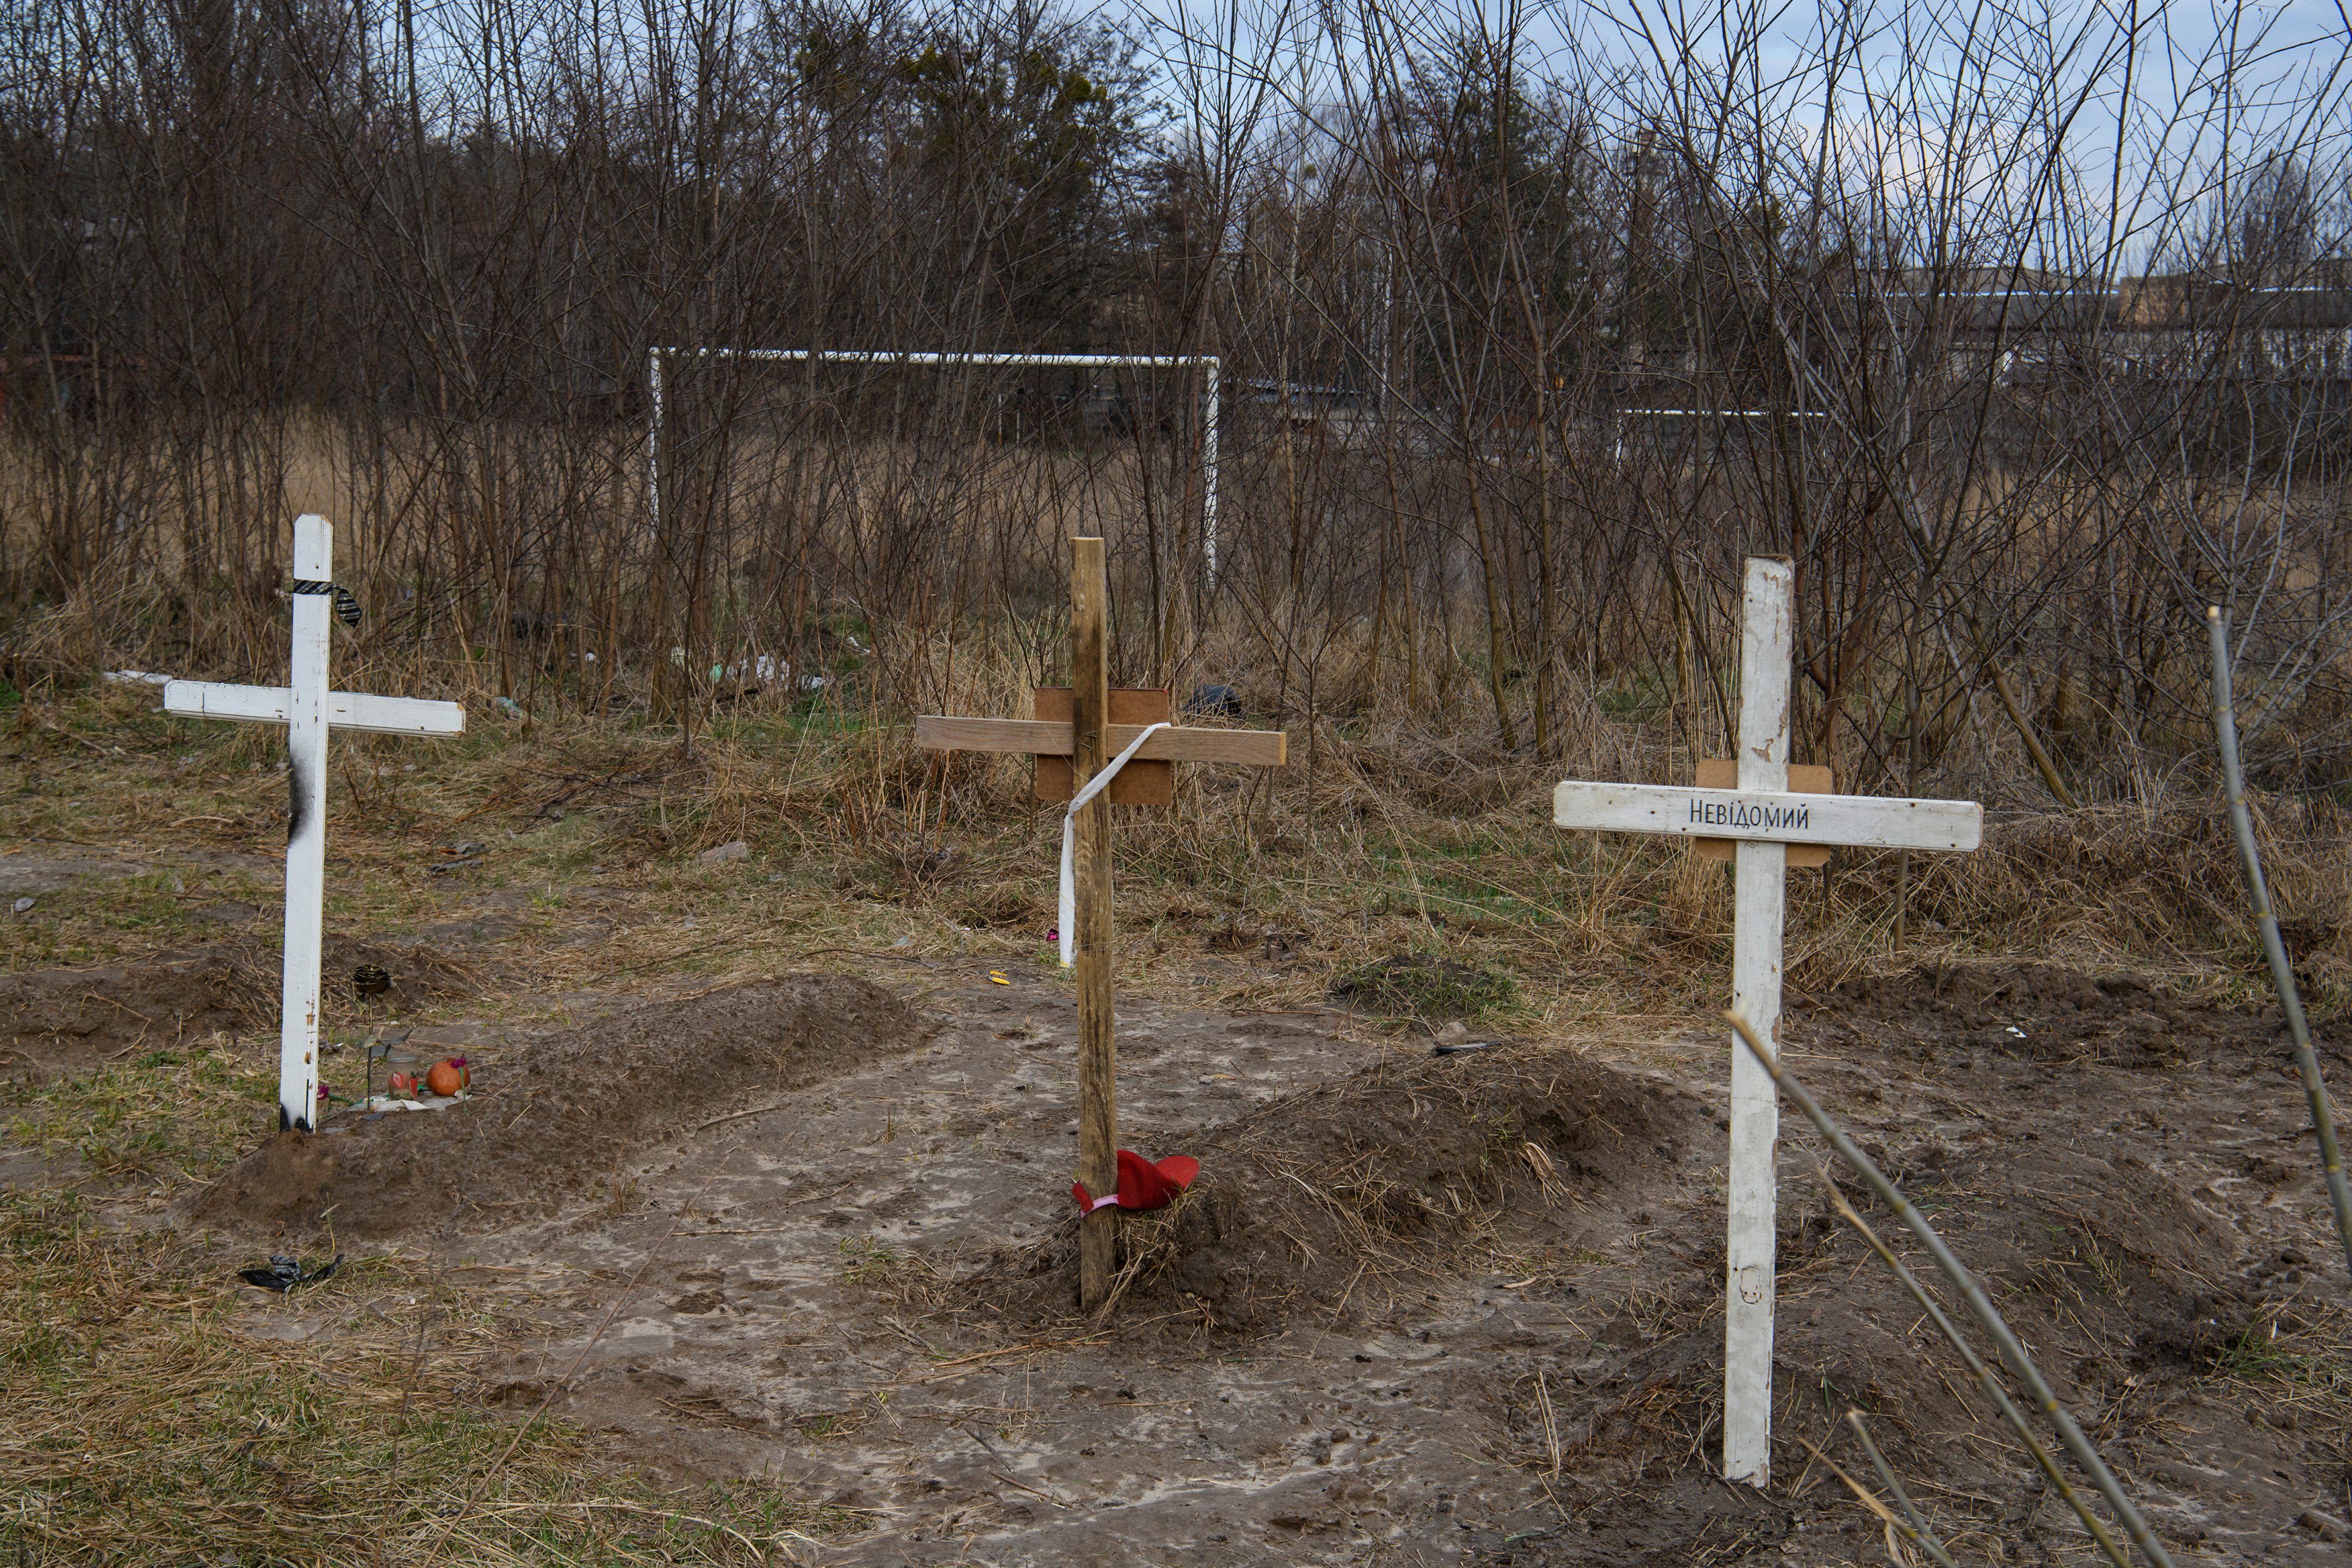 Graves with bodies of civilians, who according to local residents were killed by Russian soldiers, are seen, in Bucha